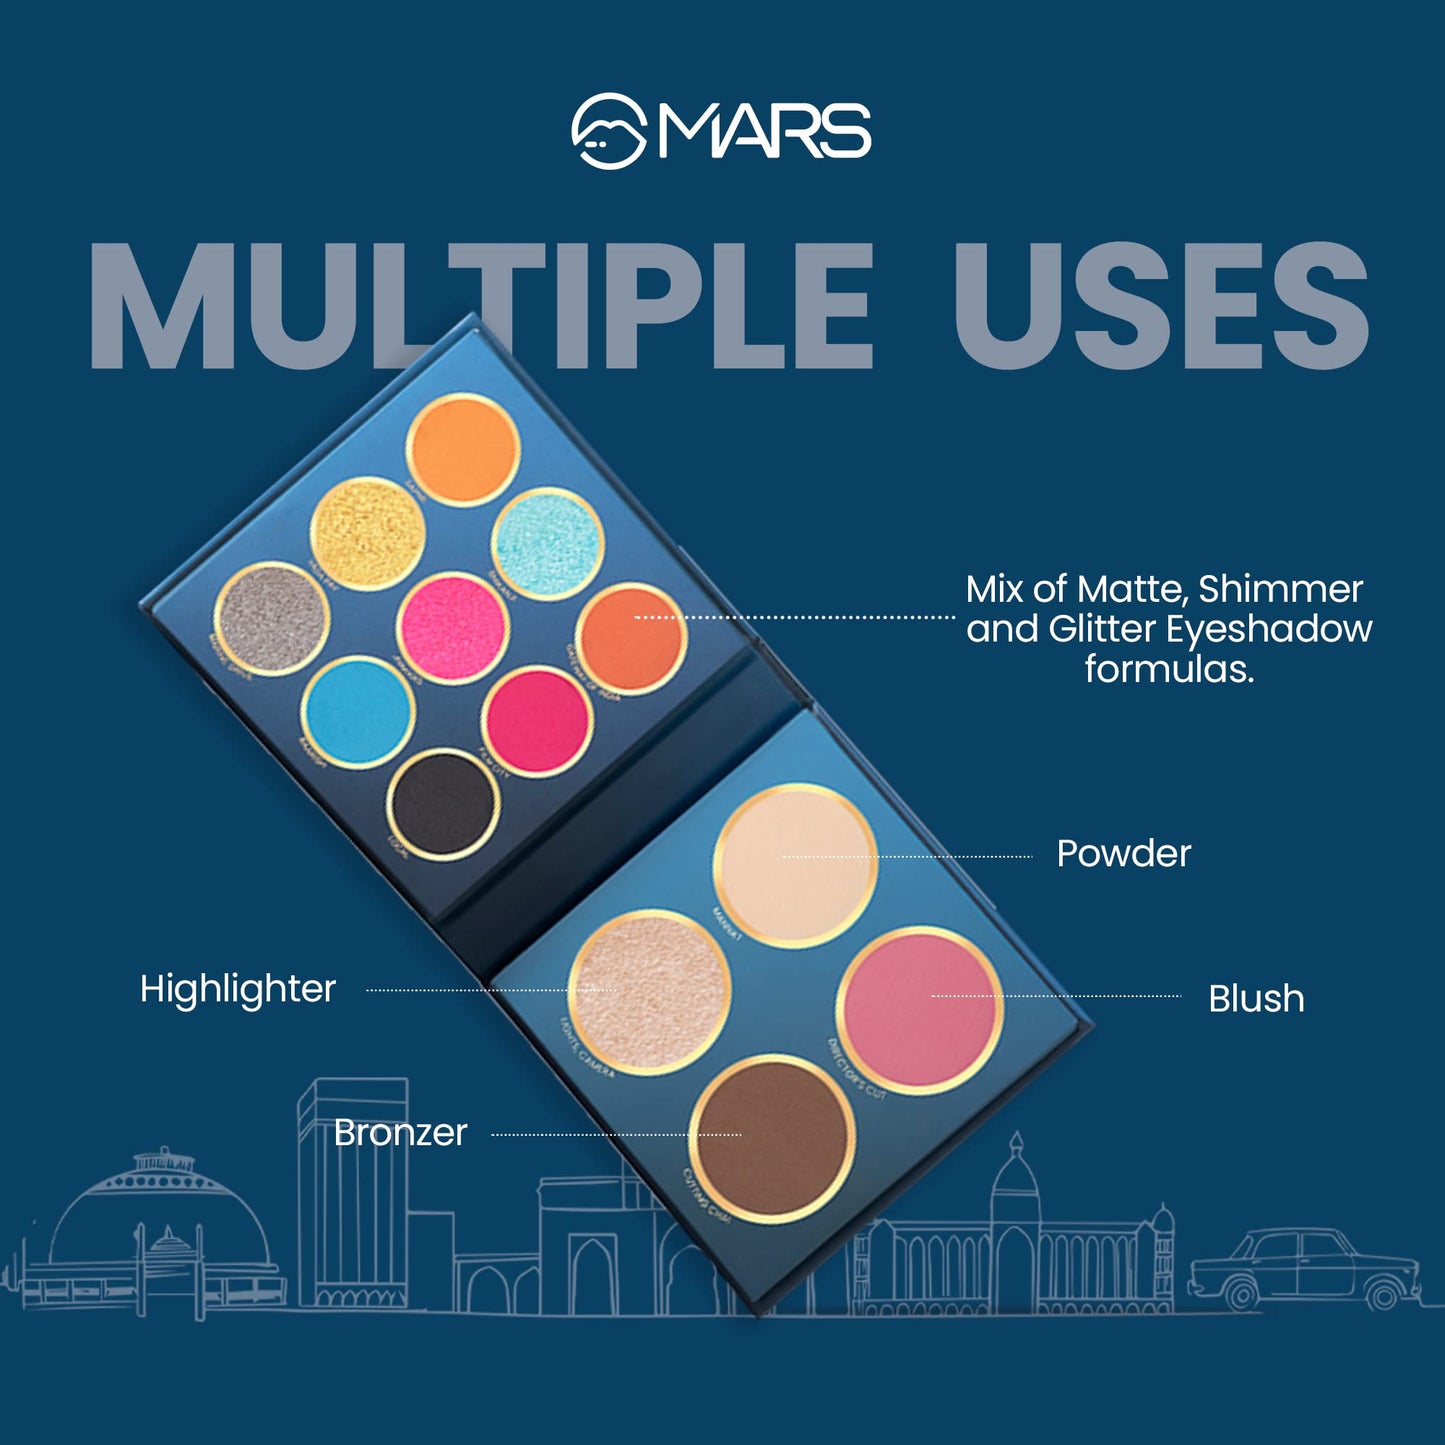 MARS The City Paradise Makeup Kit | Highly Pigmented and Blendable | 9 Eyeshadow Palette with 1 Highlighter, Blusher, Bronzer & Compact Powder each (16.0 gm) (07-Jaipur)